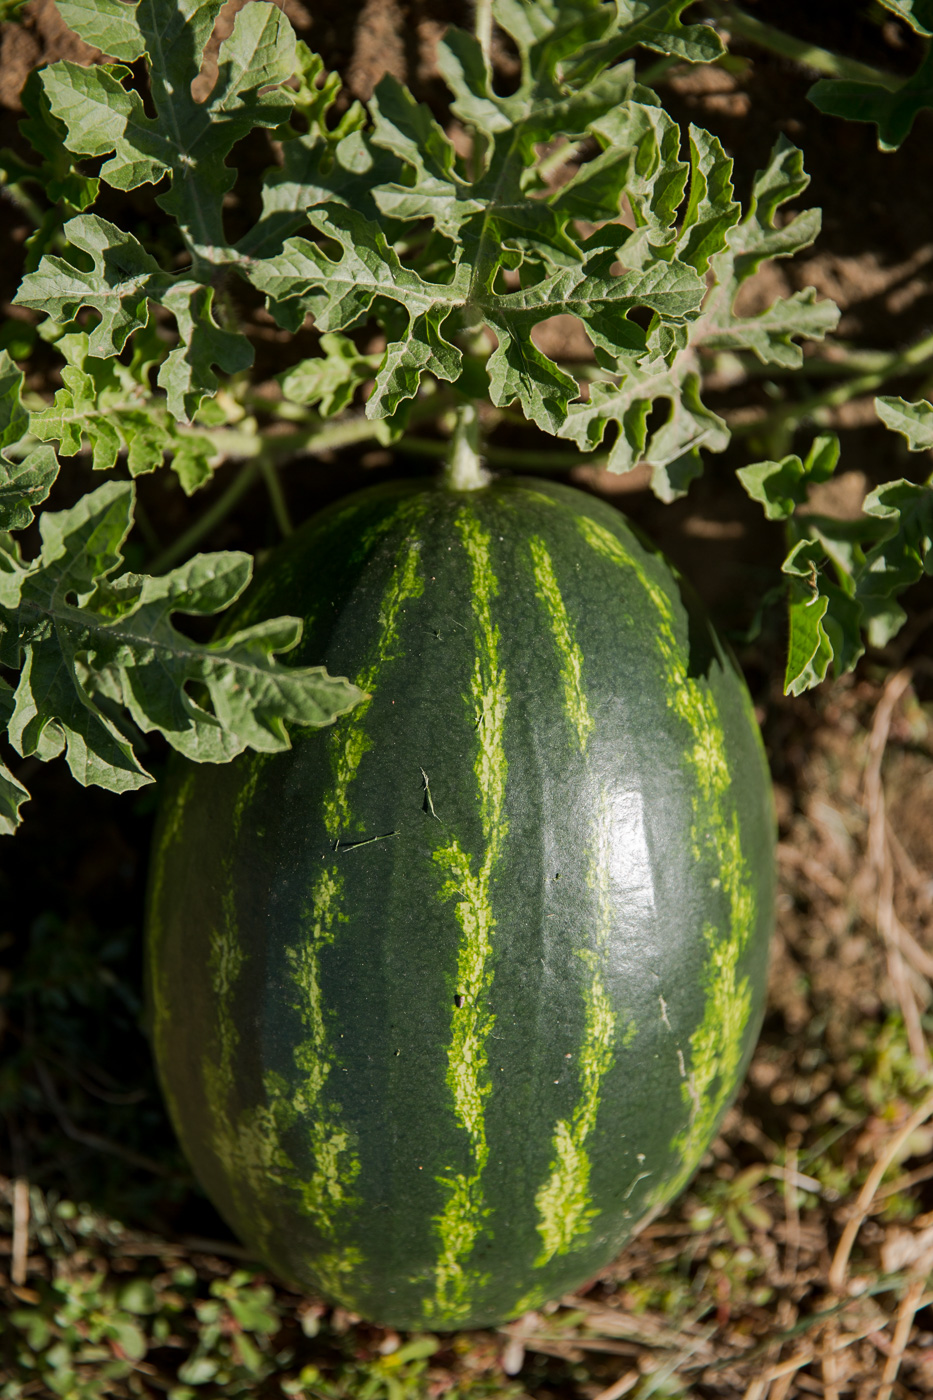 agriculture photographer - a watermelon growing on a vine